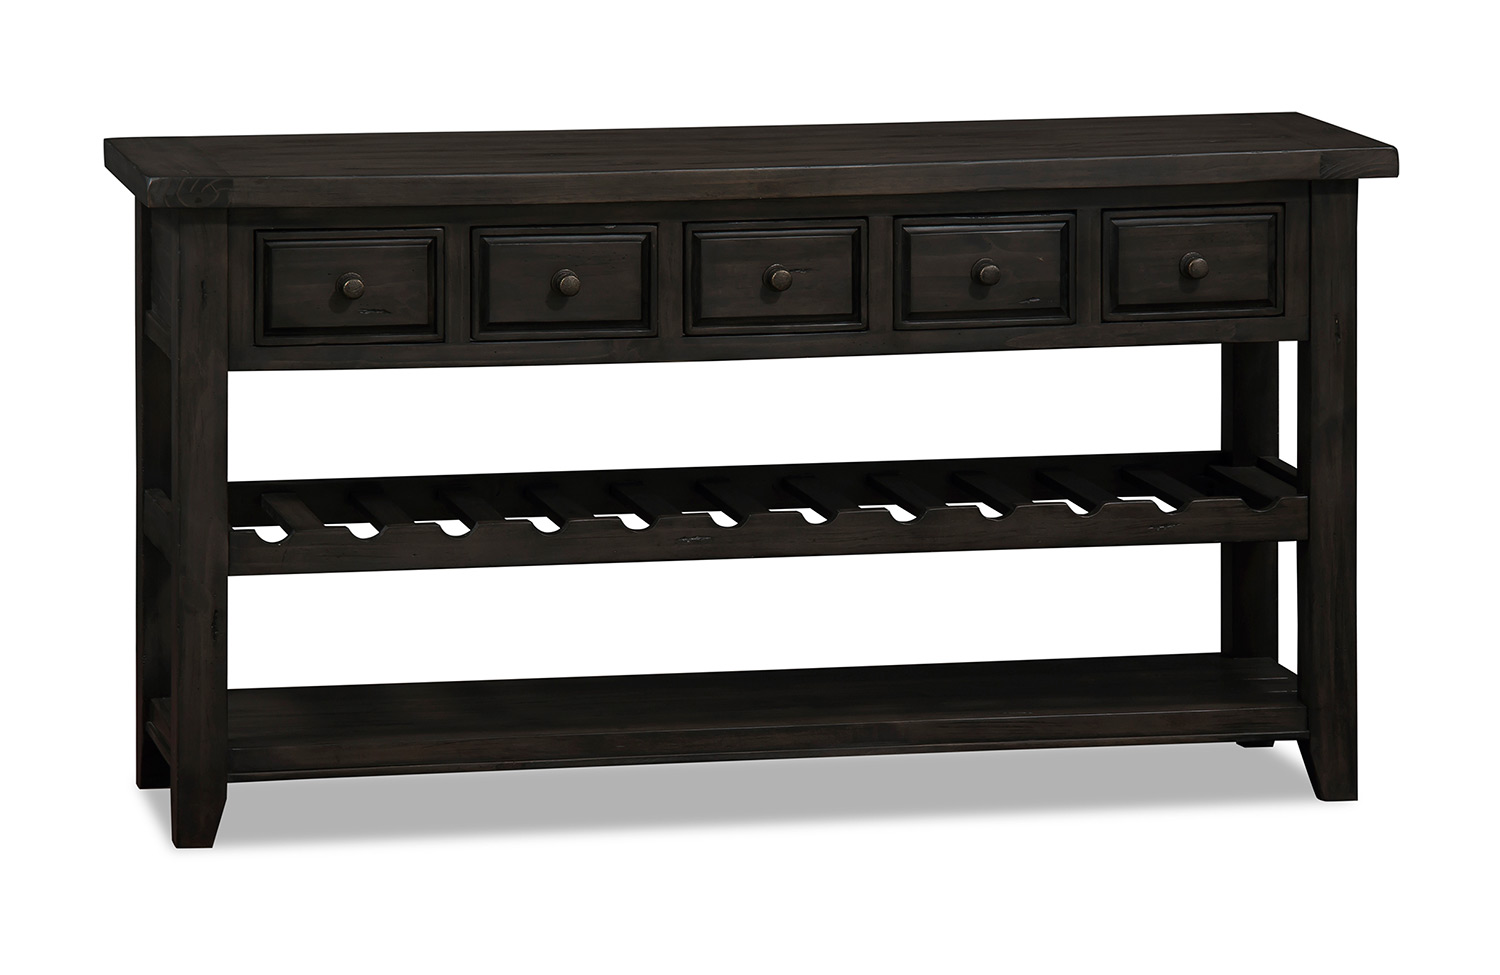 Hillsdale Tuscan Retreat Wine Rack Hall Table with 5 Drawers - Weathered Gray